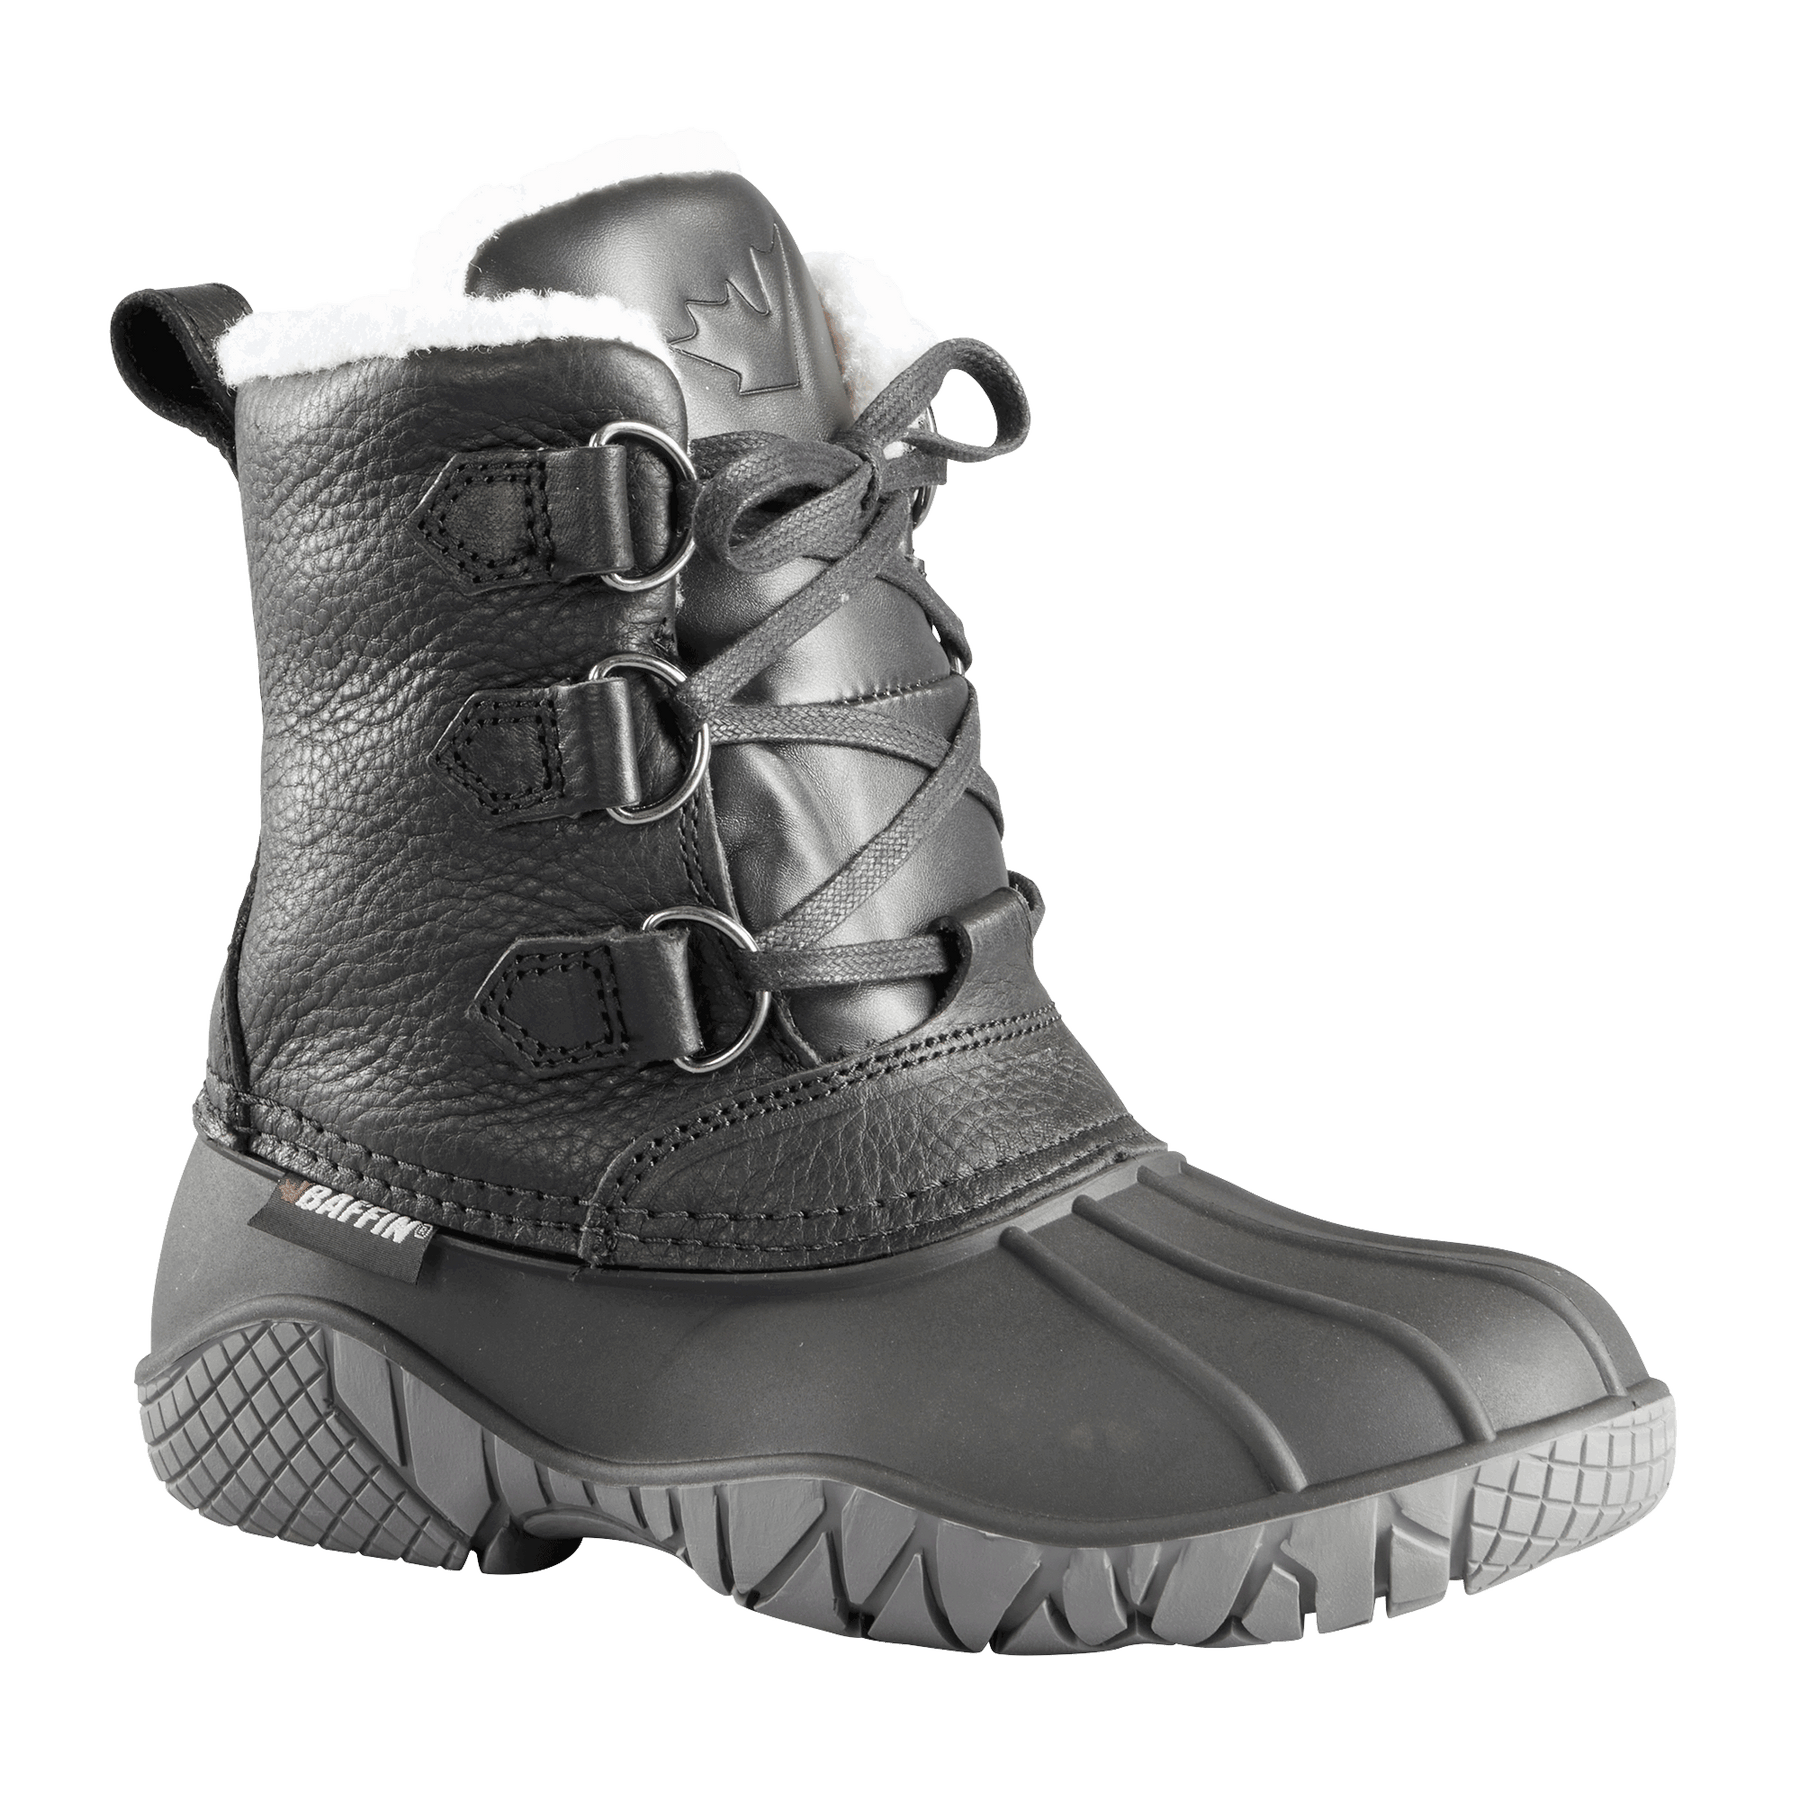 YELLOWKNIFE | Women's Boot – Baffin - Born in the North '79